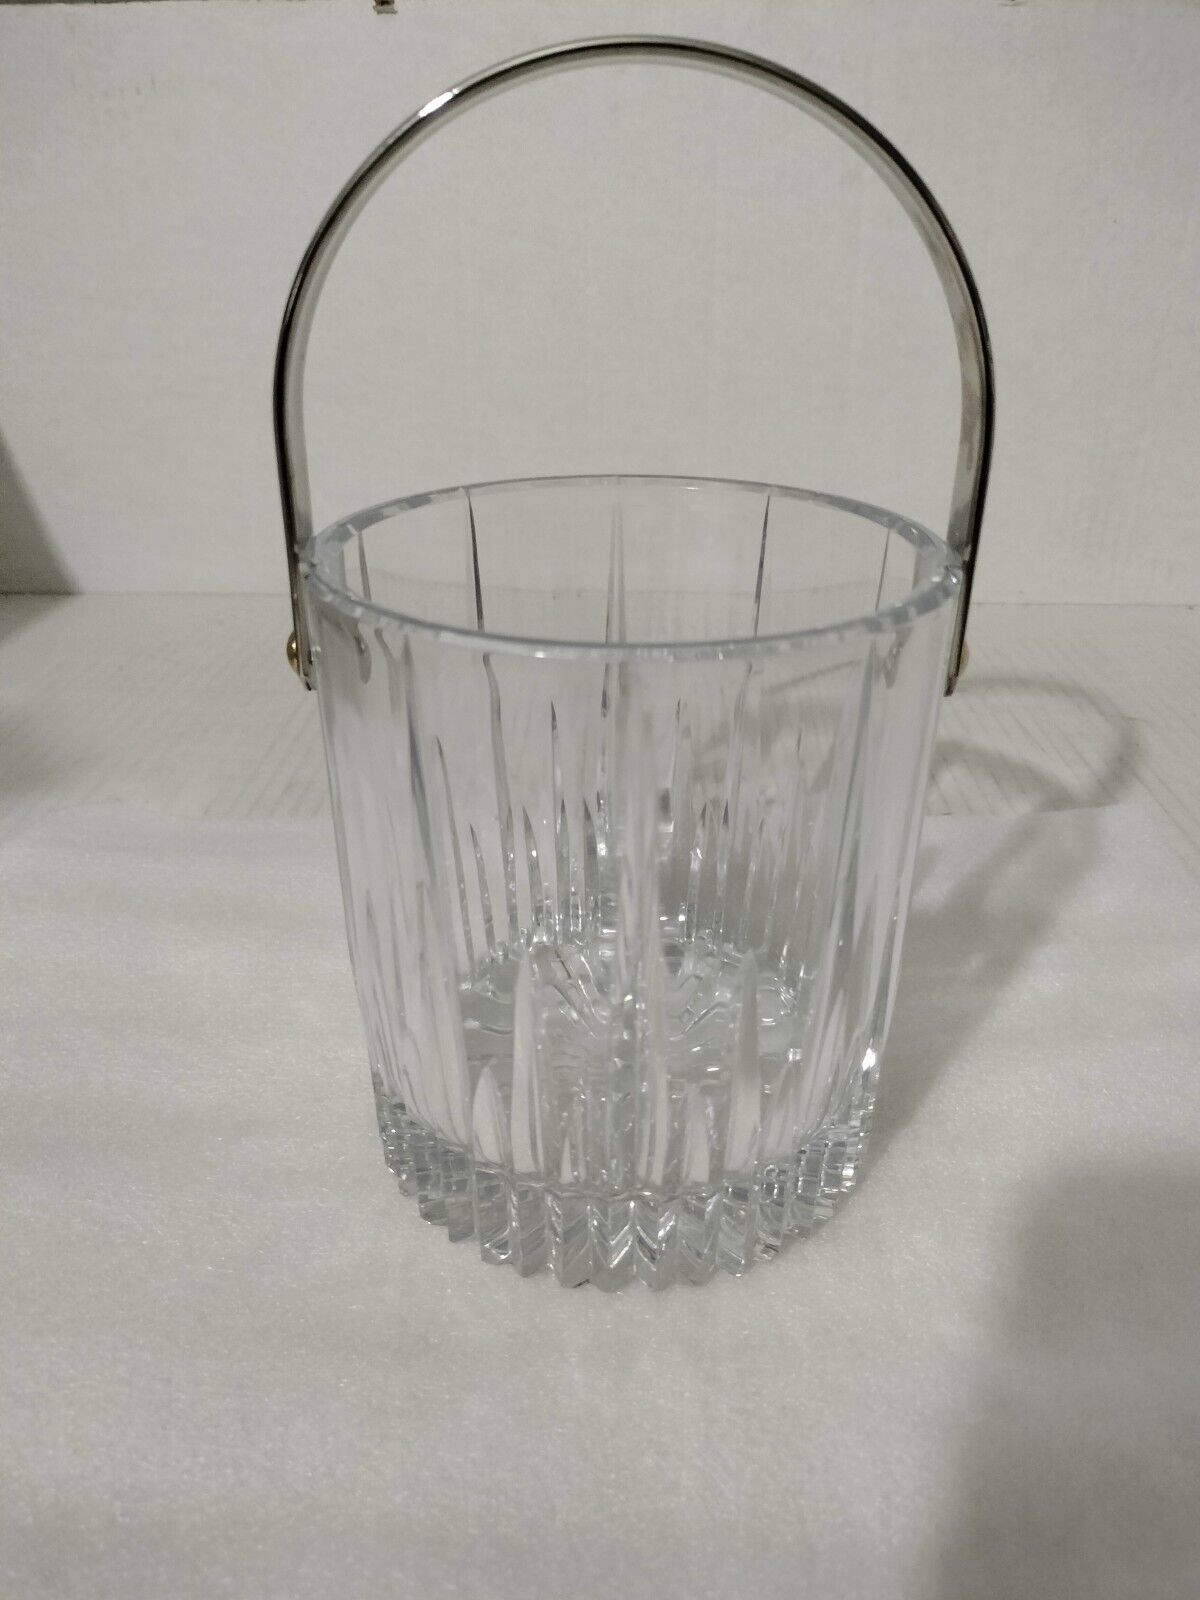 Vintage Cut Crystal Ice Bucket With Polished Chrome Handle. This Ice Bucket...